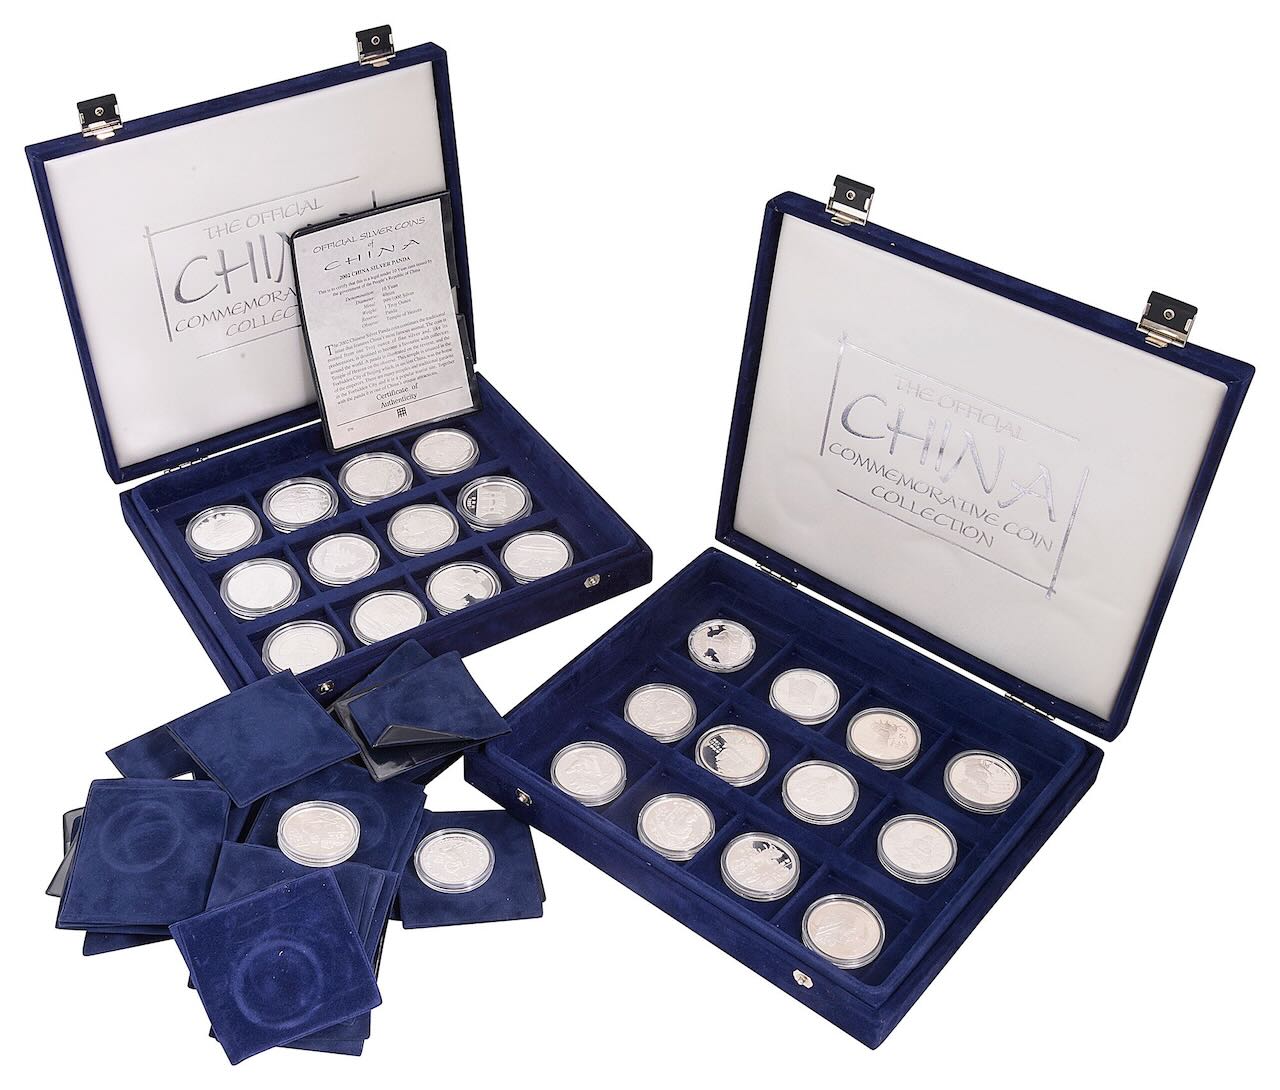 The Official Silver Coins of China commemorative proof coin collection